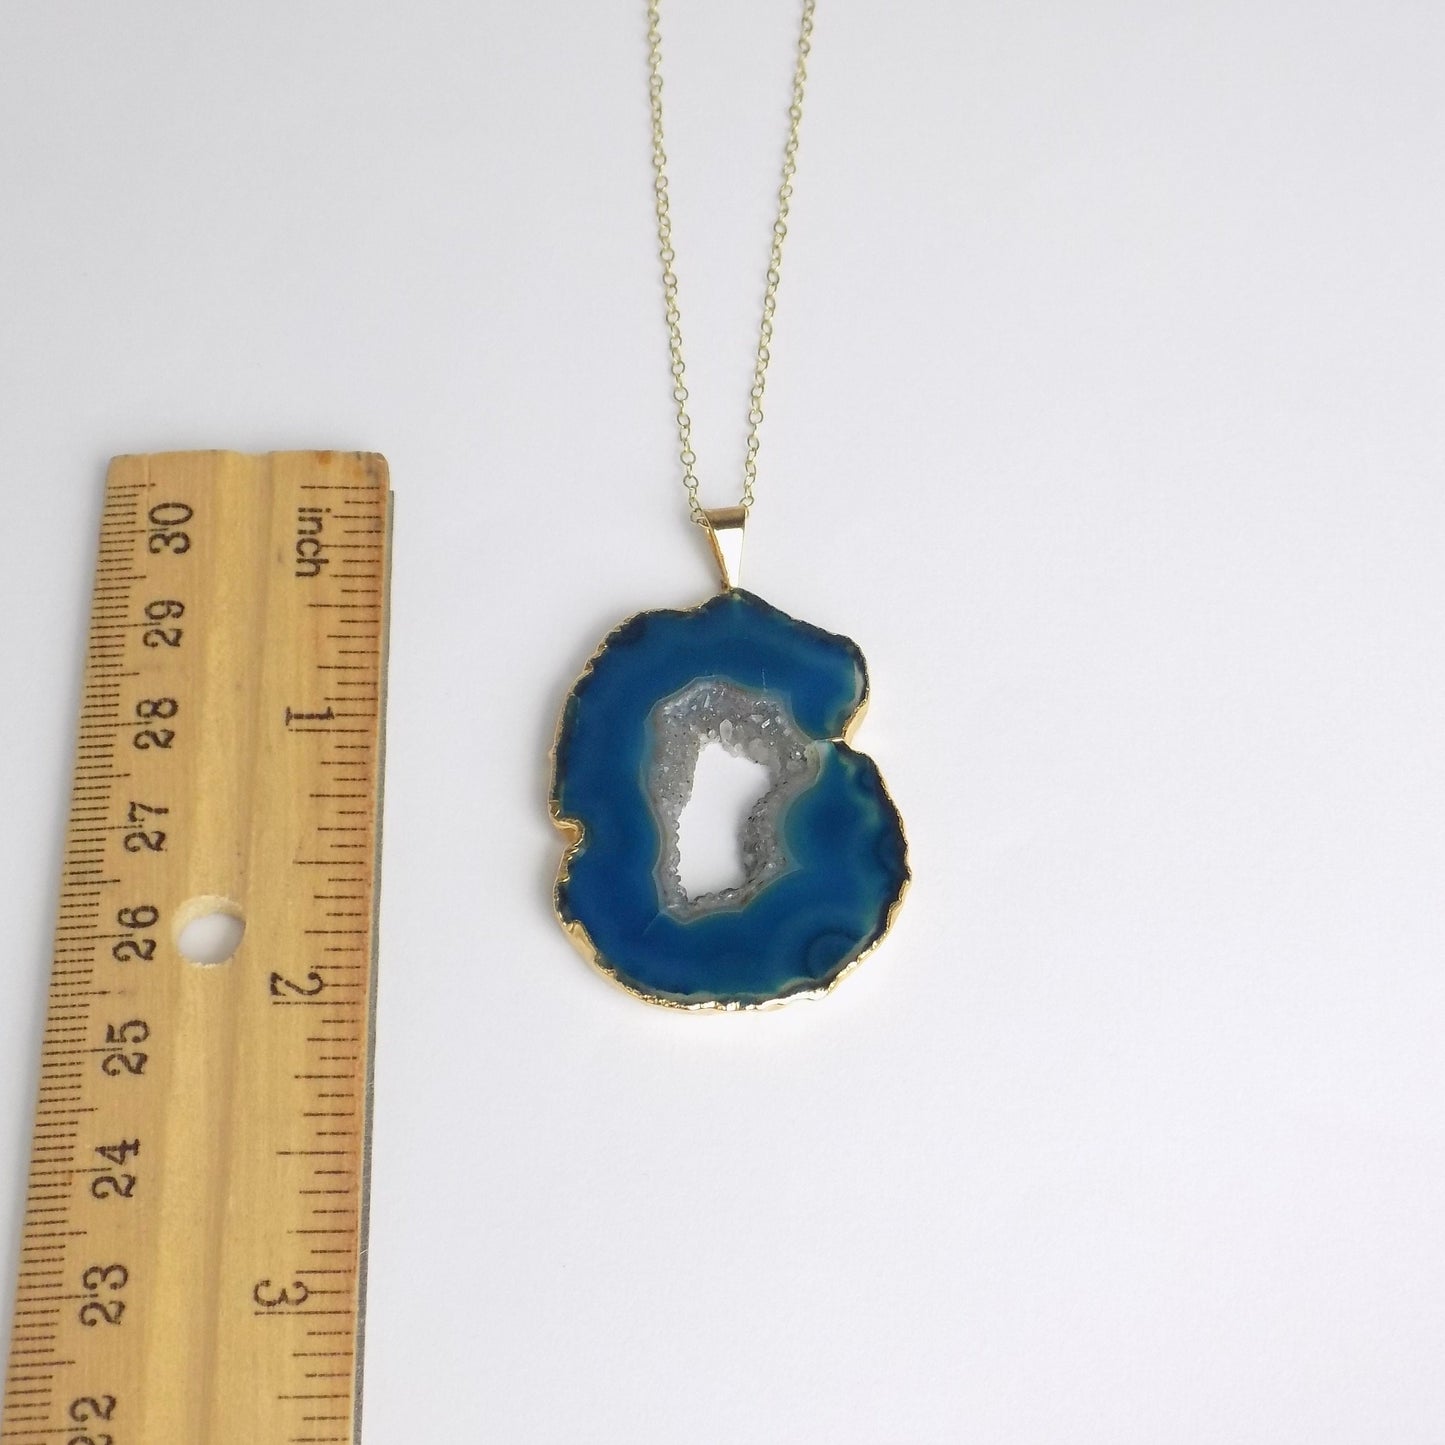 Teal Geode Necklace Gold, Boho Natural Gemstone Statement Pendant with Druzy, Gift For Her, G15-140